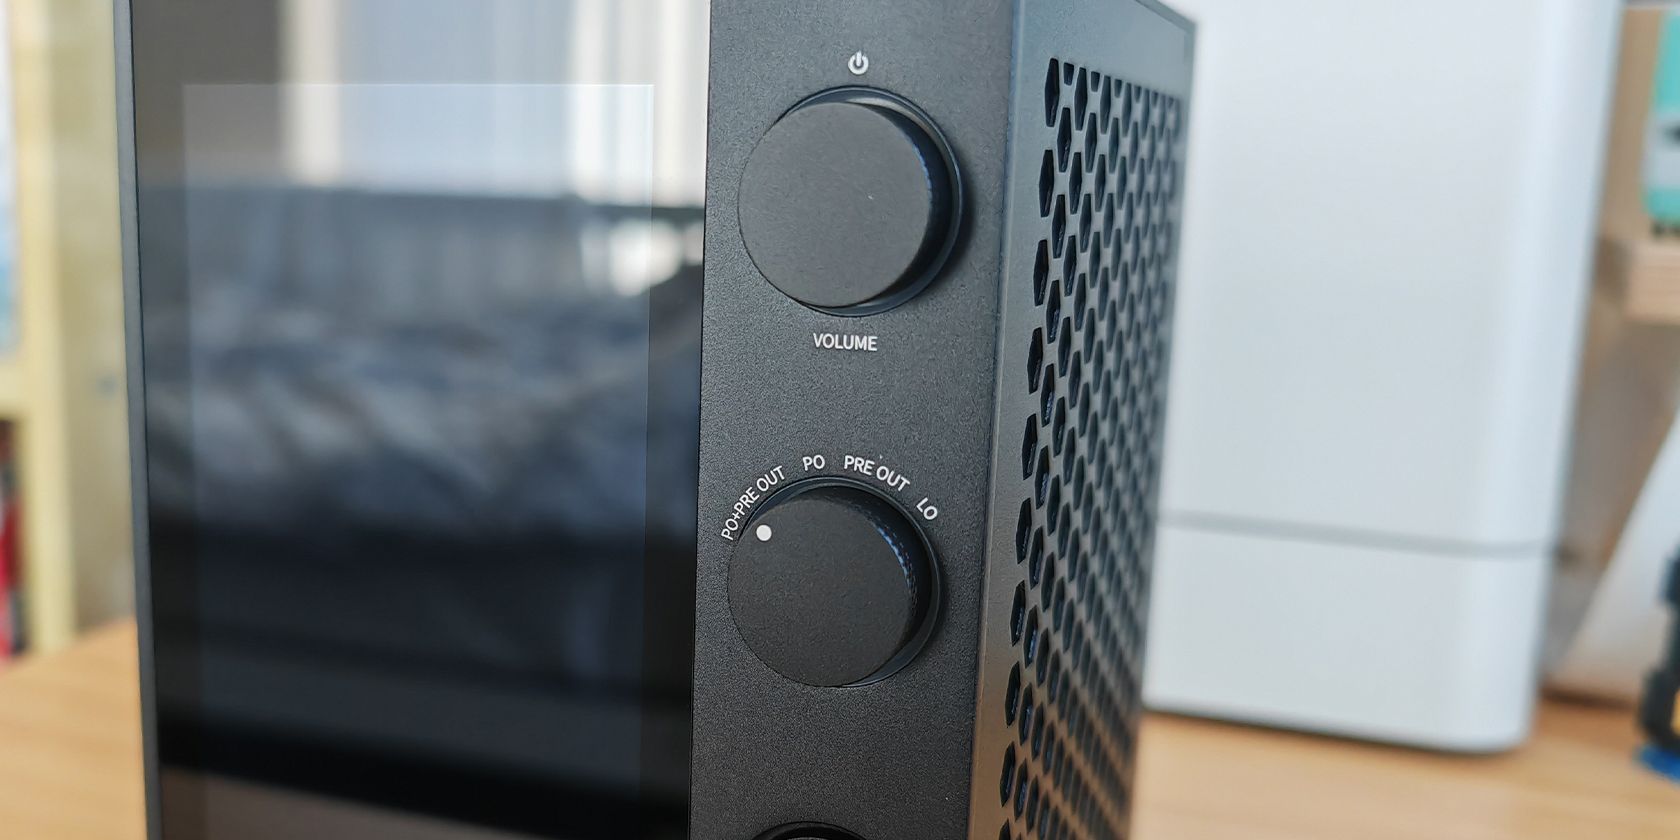 FiiO - Good news!! Our all-in-one desktop Android HiFi music player R7 is  honored with two VGP awards, the Gold Award and the Desktop Audio Award. As  a tough competitor, the R7